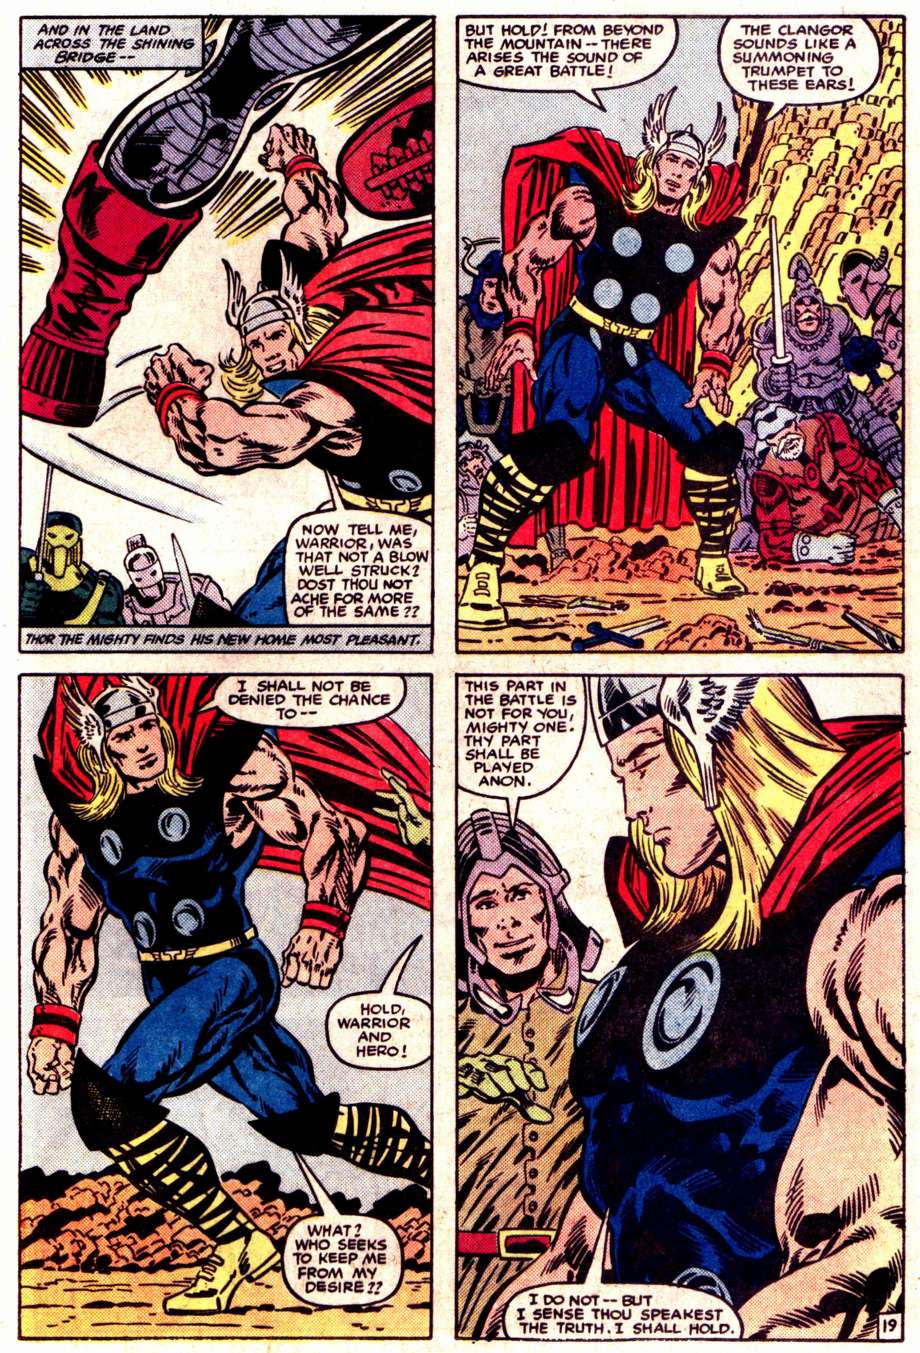 What If? (1977) issue 47 - Loki had found The hammer of Thor - Page 20